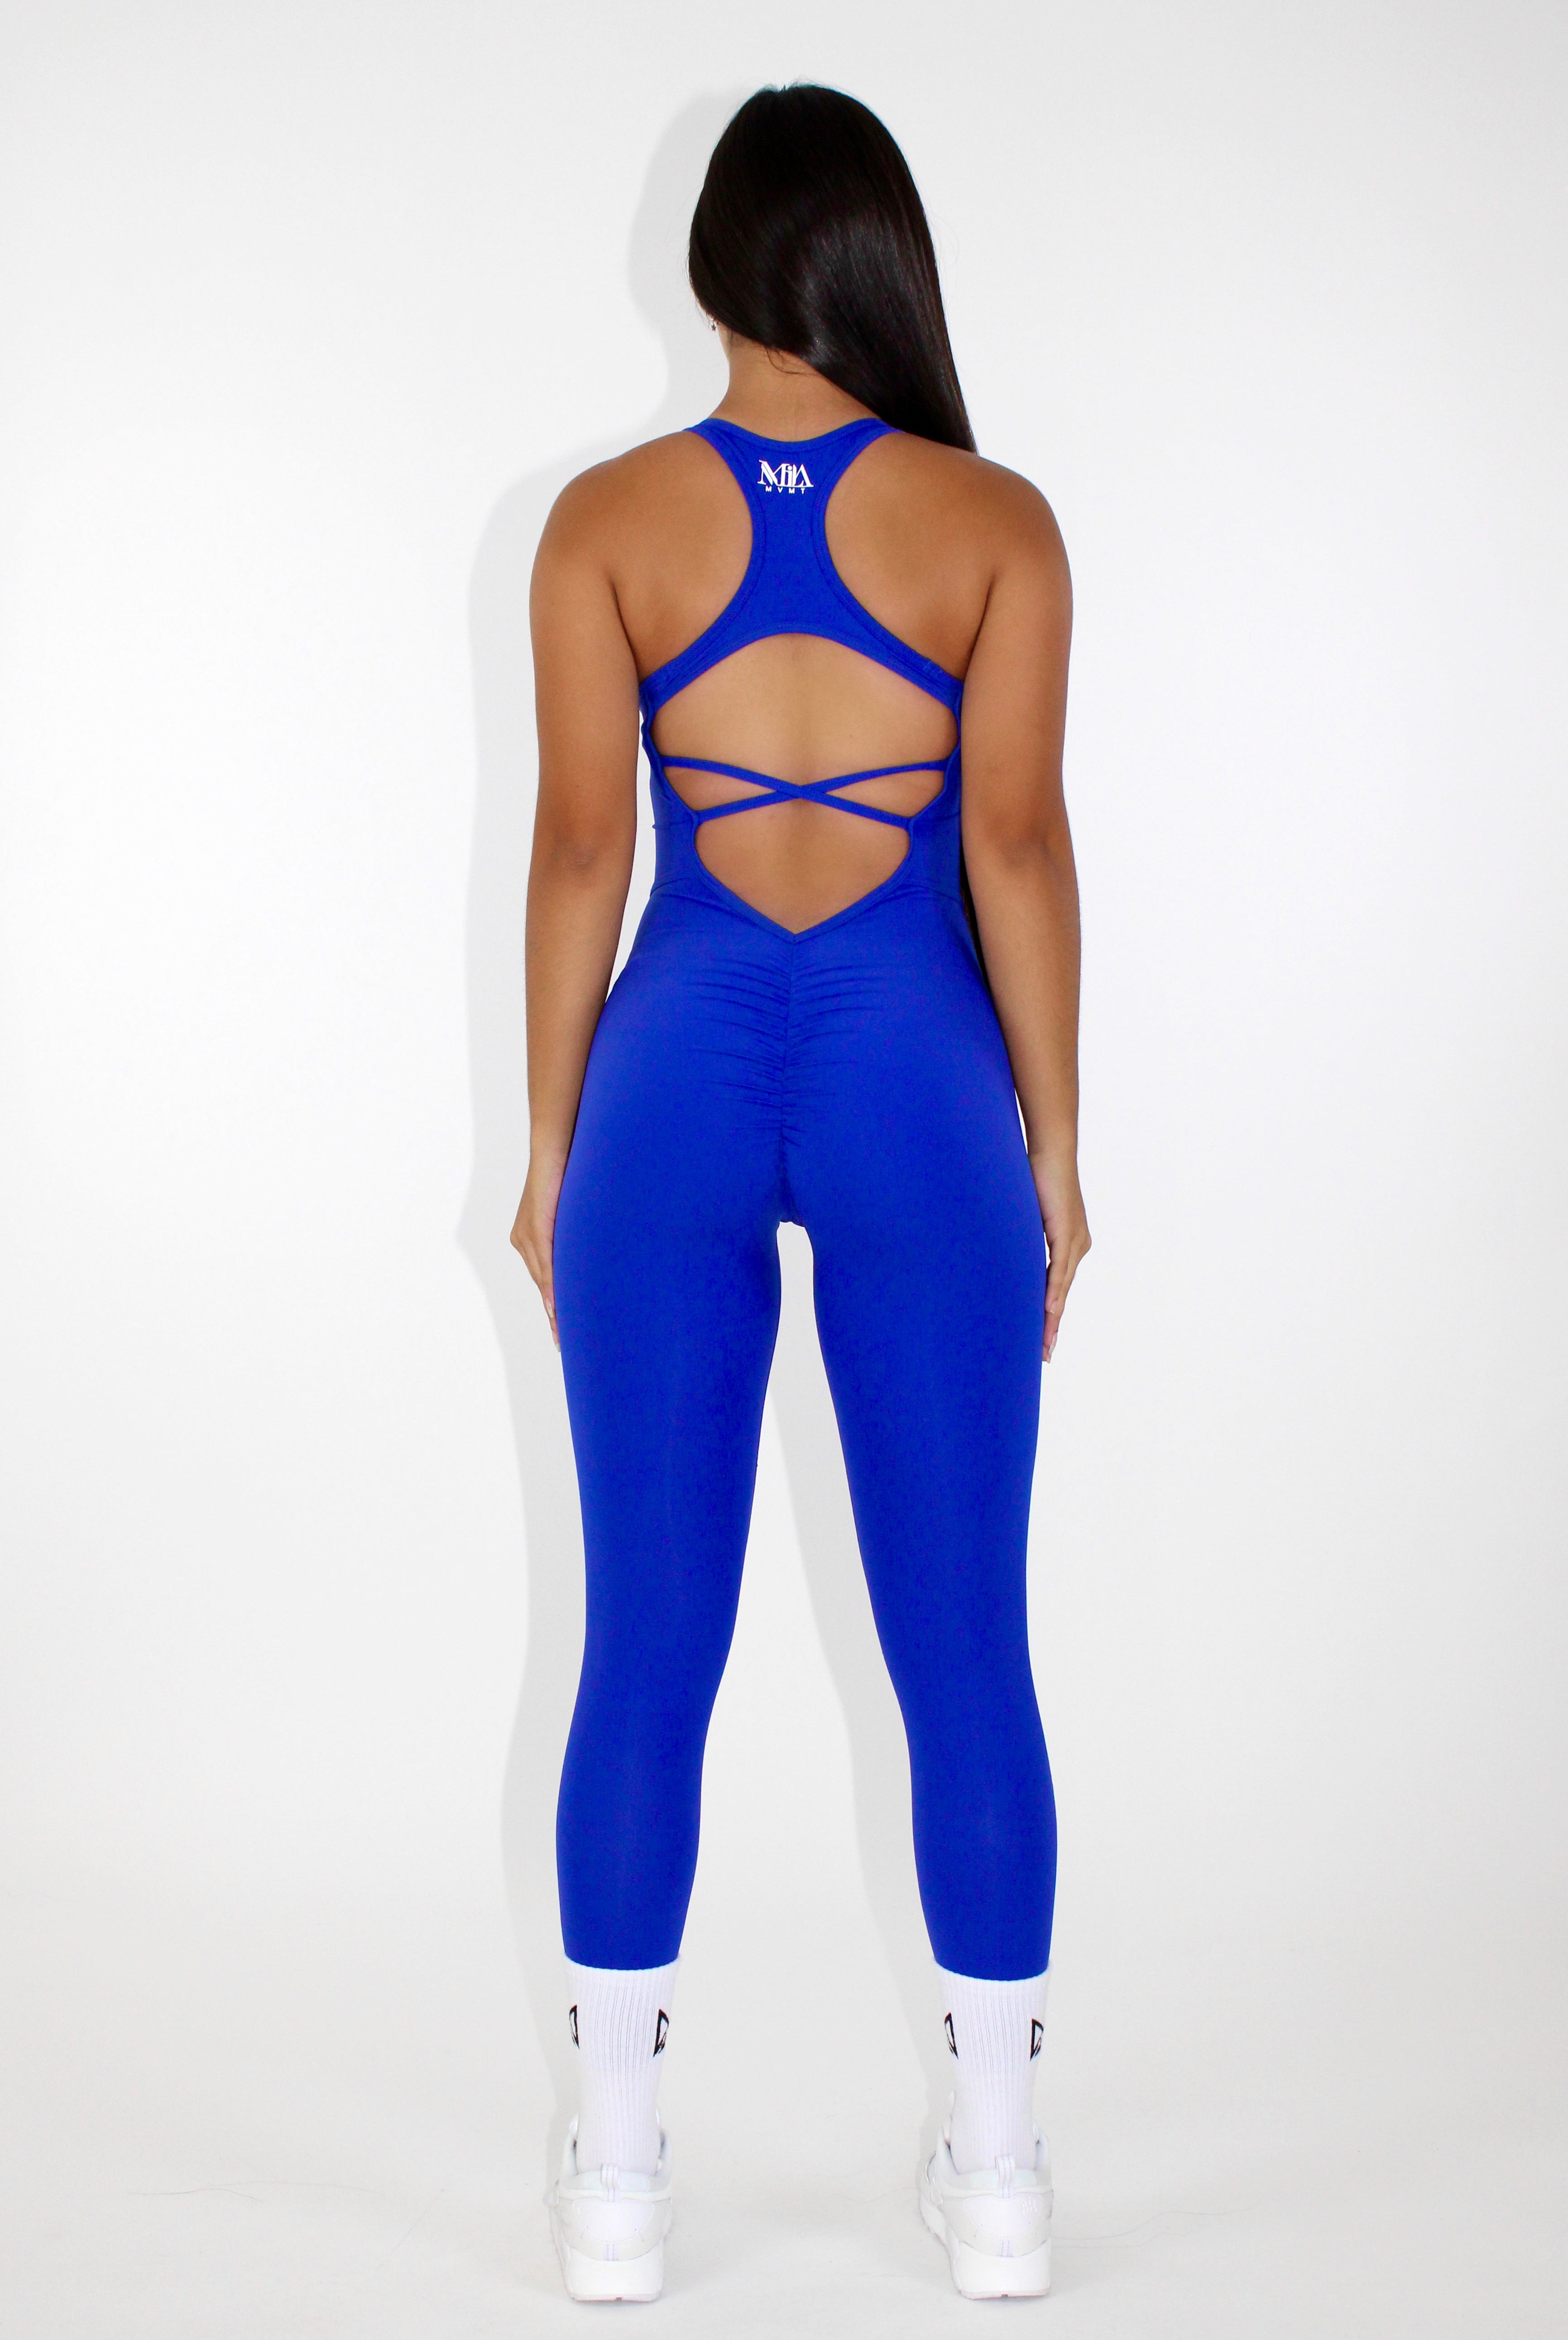 Athletic Sportswear Jumpsuit in Blue - One Piece Gym Set Back View